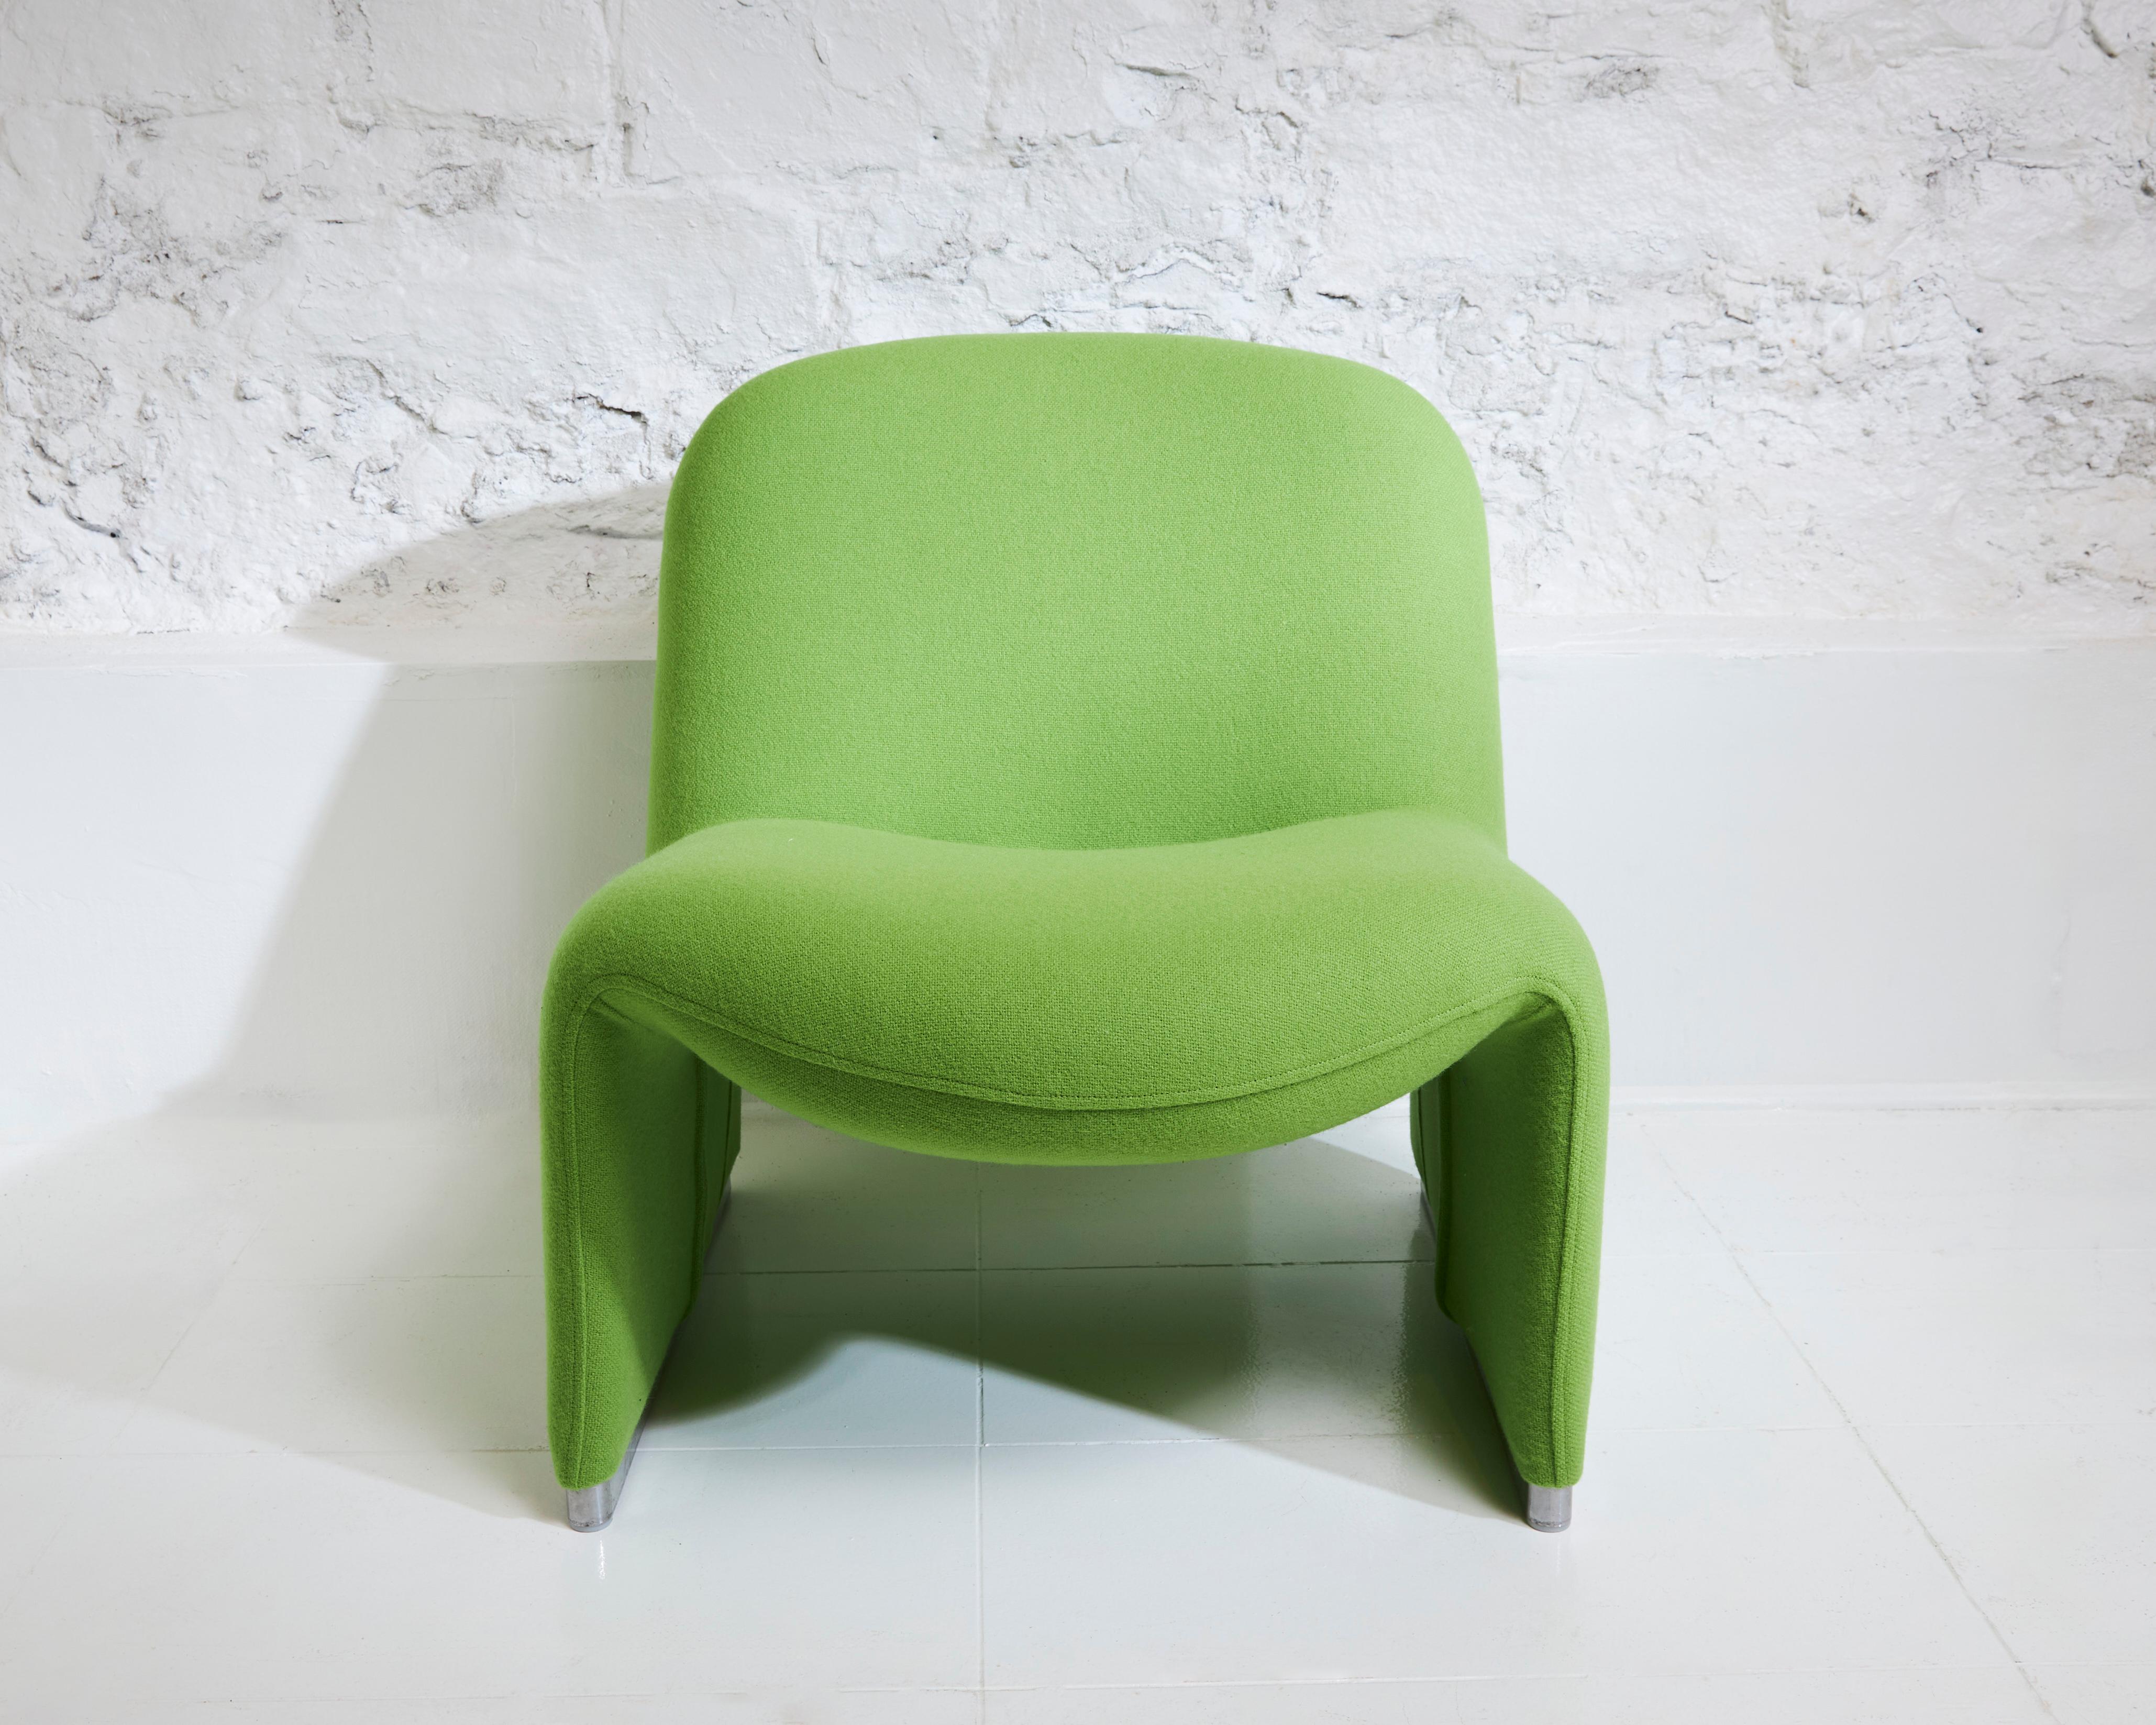 The Alky armchair, created by Giancarlo Piretti in the late 1960s, continues to captivate with its distinctive lounge chair design, which remains unparalleled even today. This multifunctional armchair seamlessly blends comfort, design, and